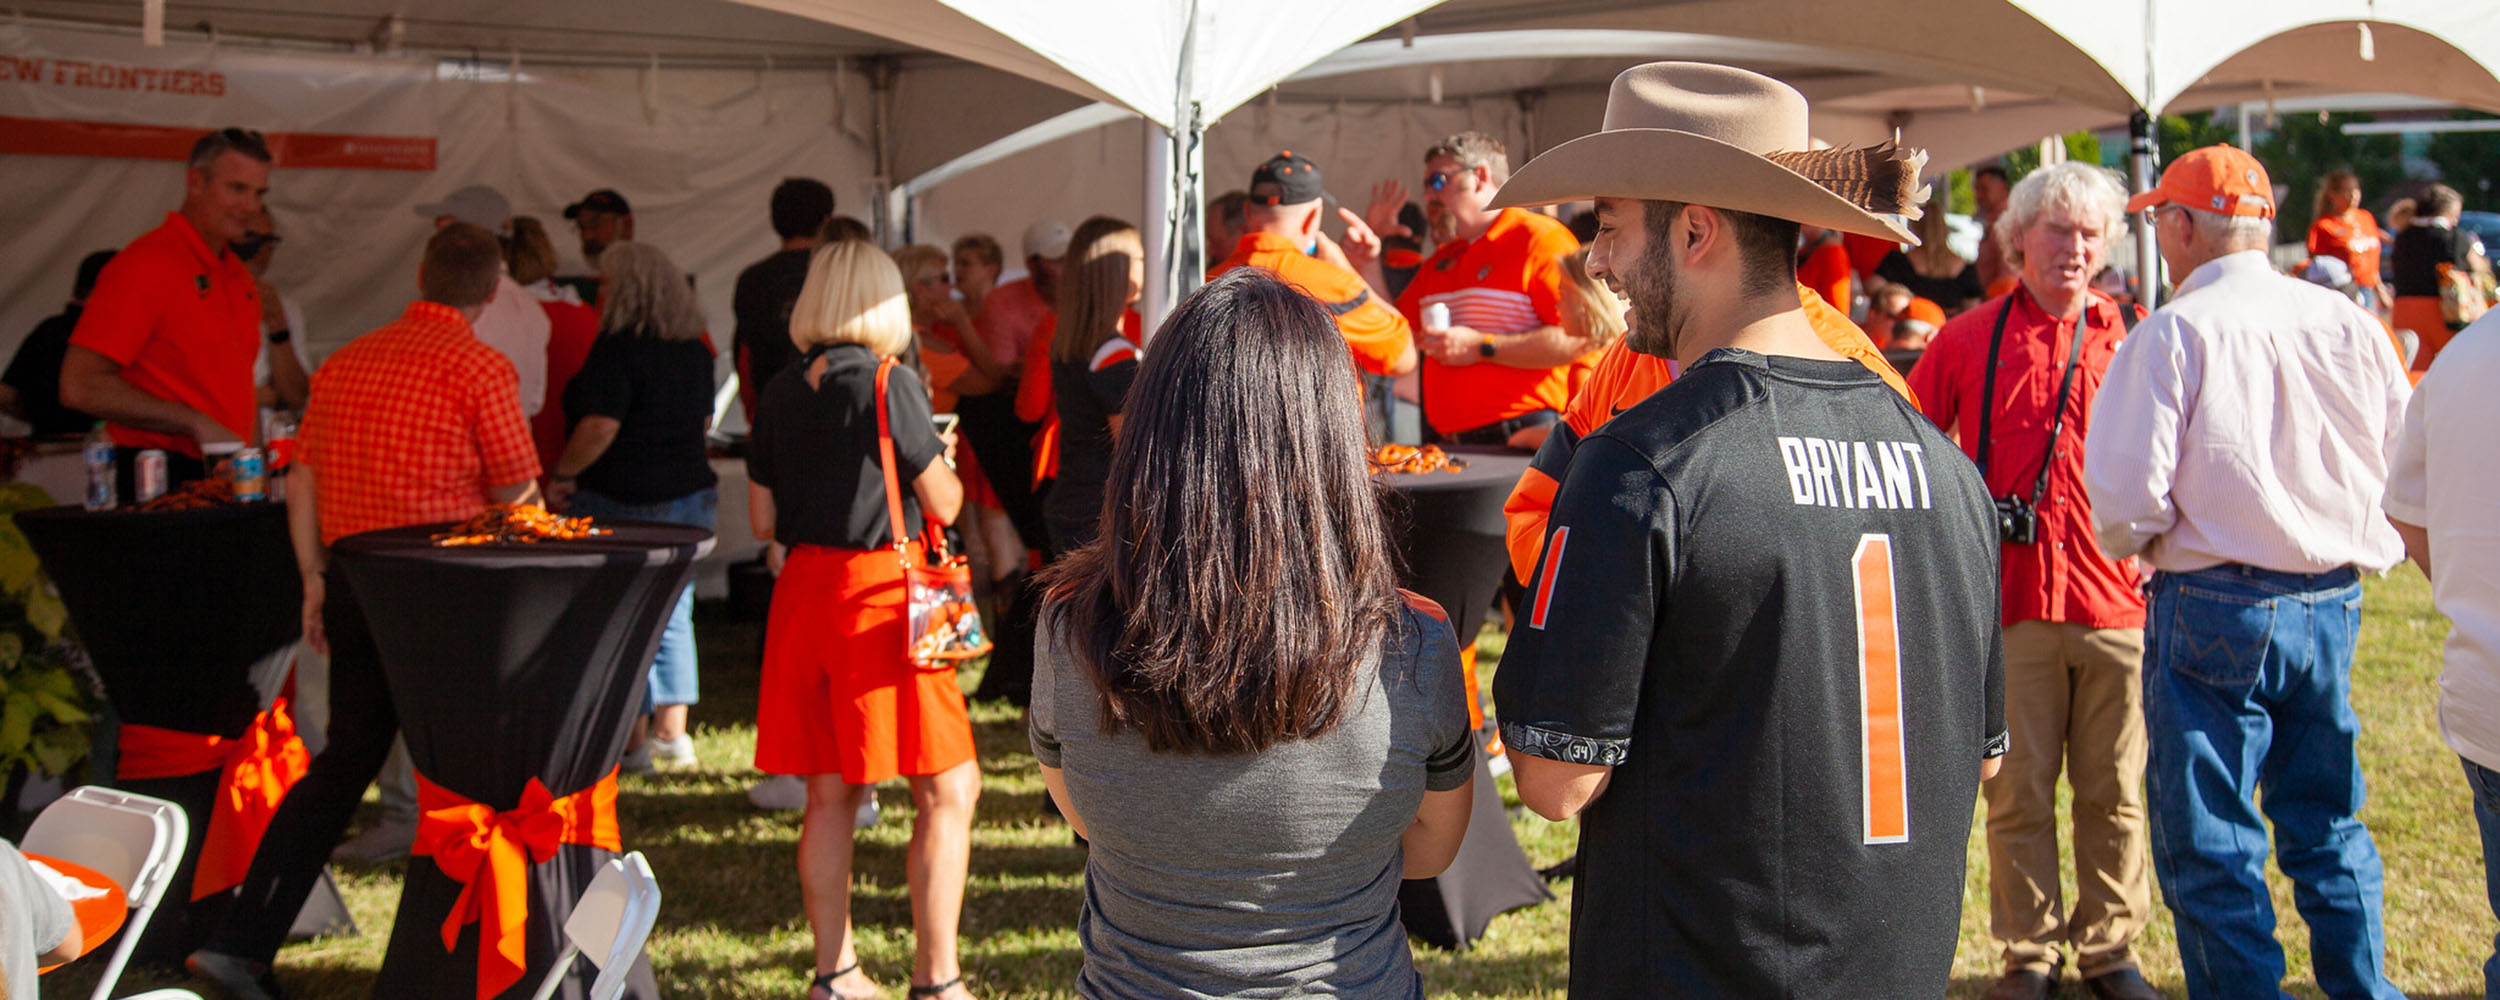 Ferguson College of Agriculture alumni and New Frontiers donors attended the OSU Agriculture New Frontiers Tailgate during Roots and Boots